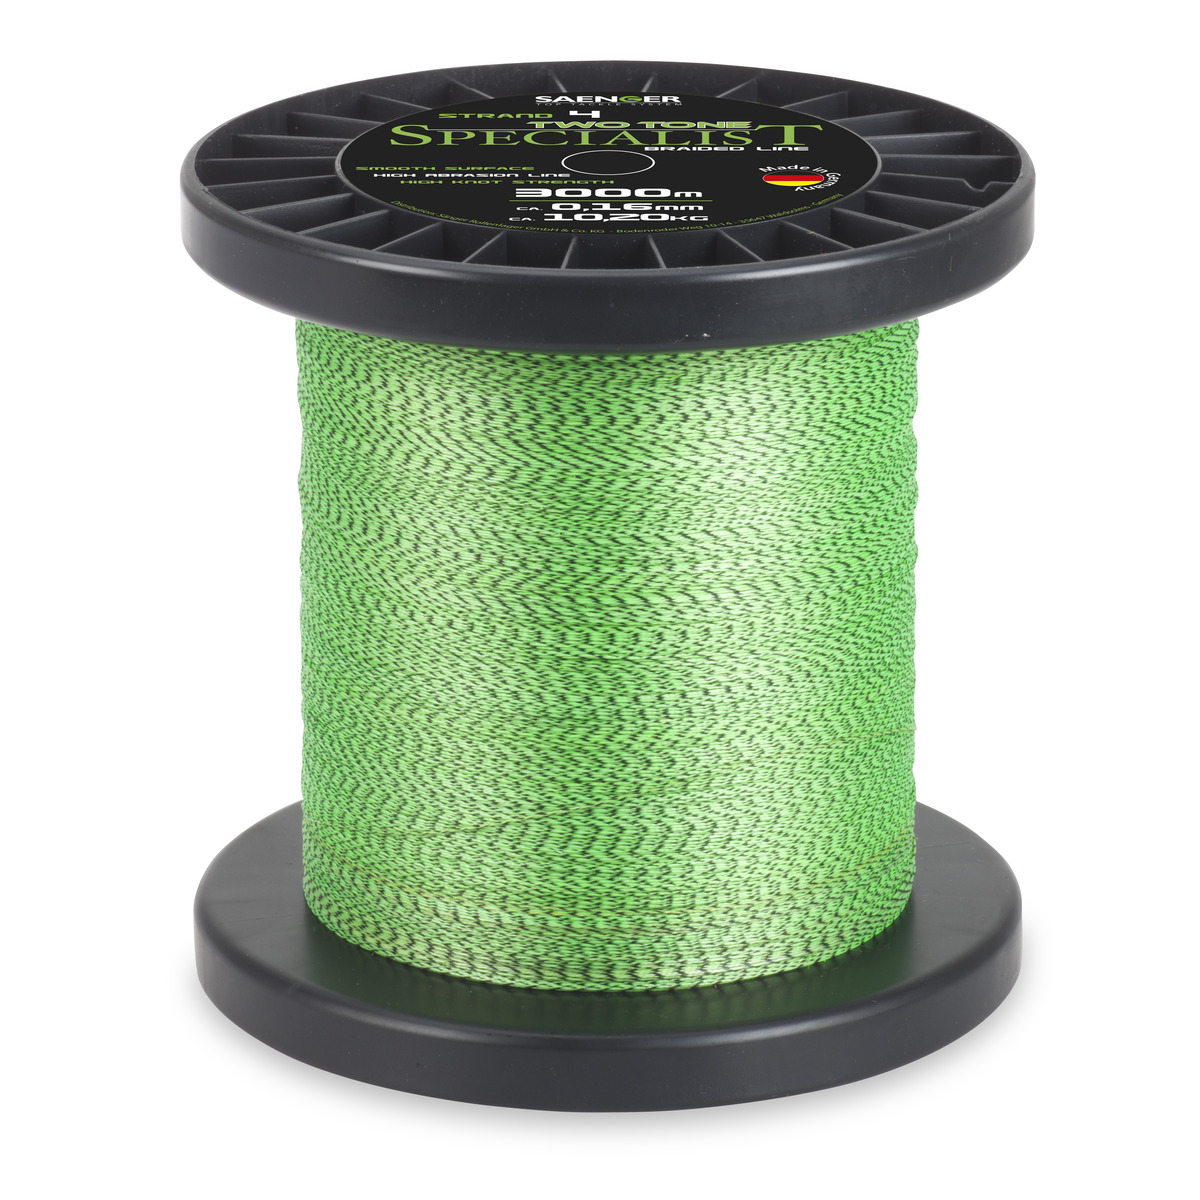 Saenger Specialist Two Tone Fluo Braid - 0,50 mm - 48,2 kg 3000 m